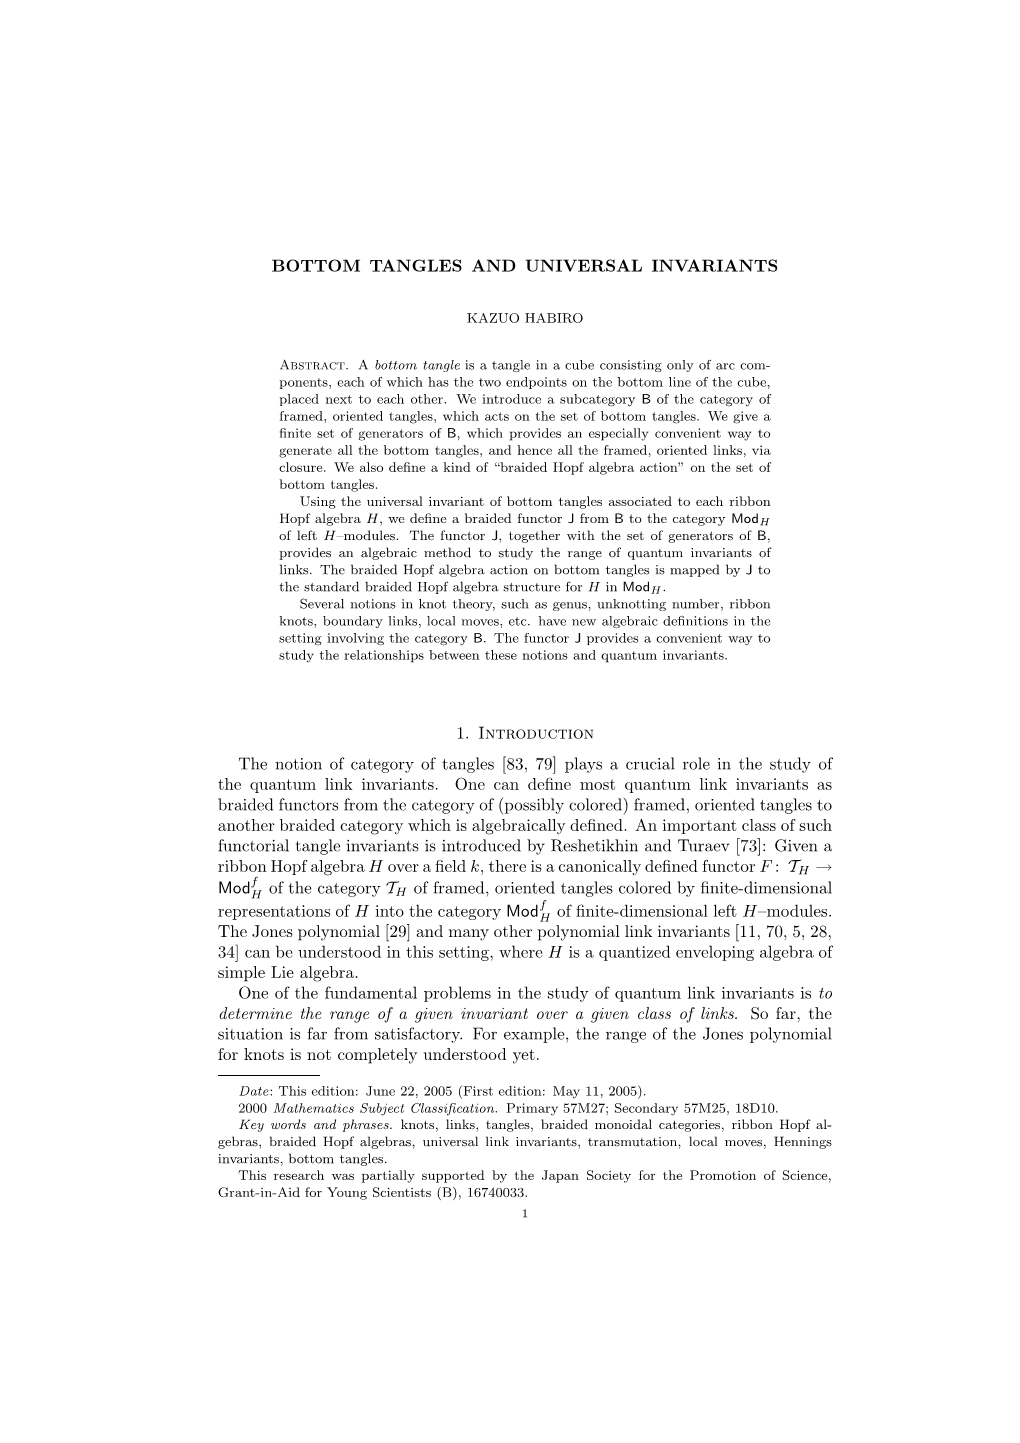 BOTTOM TANGLES and UNIVERSAL INVARIANTS 1. Introduction the Notion of Category of Tangles [83, 79] Plays a Crucial Role in the S